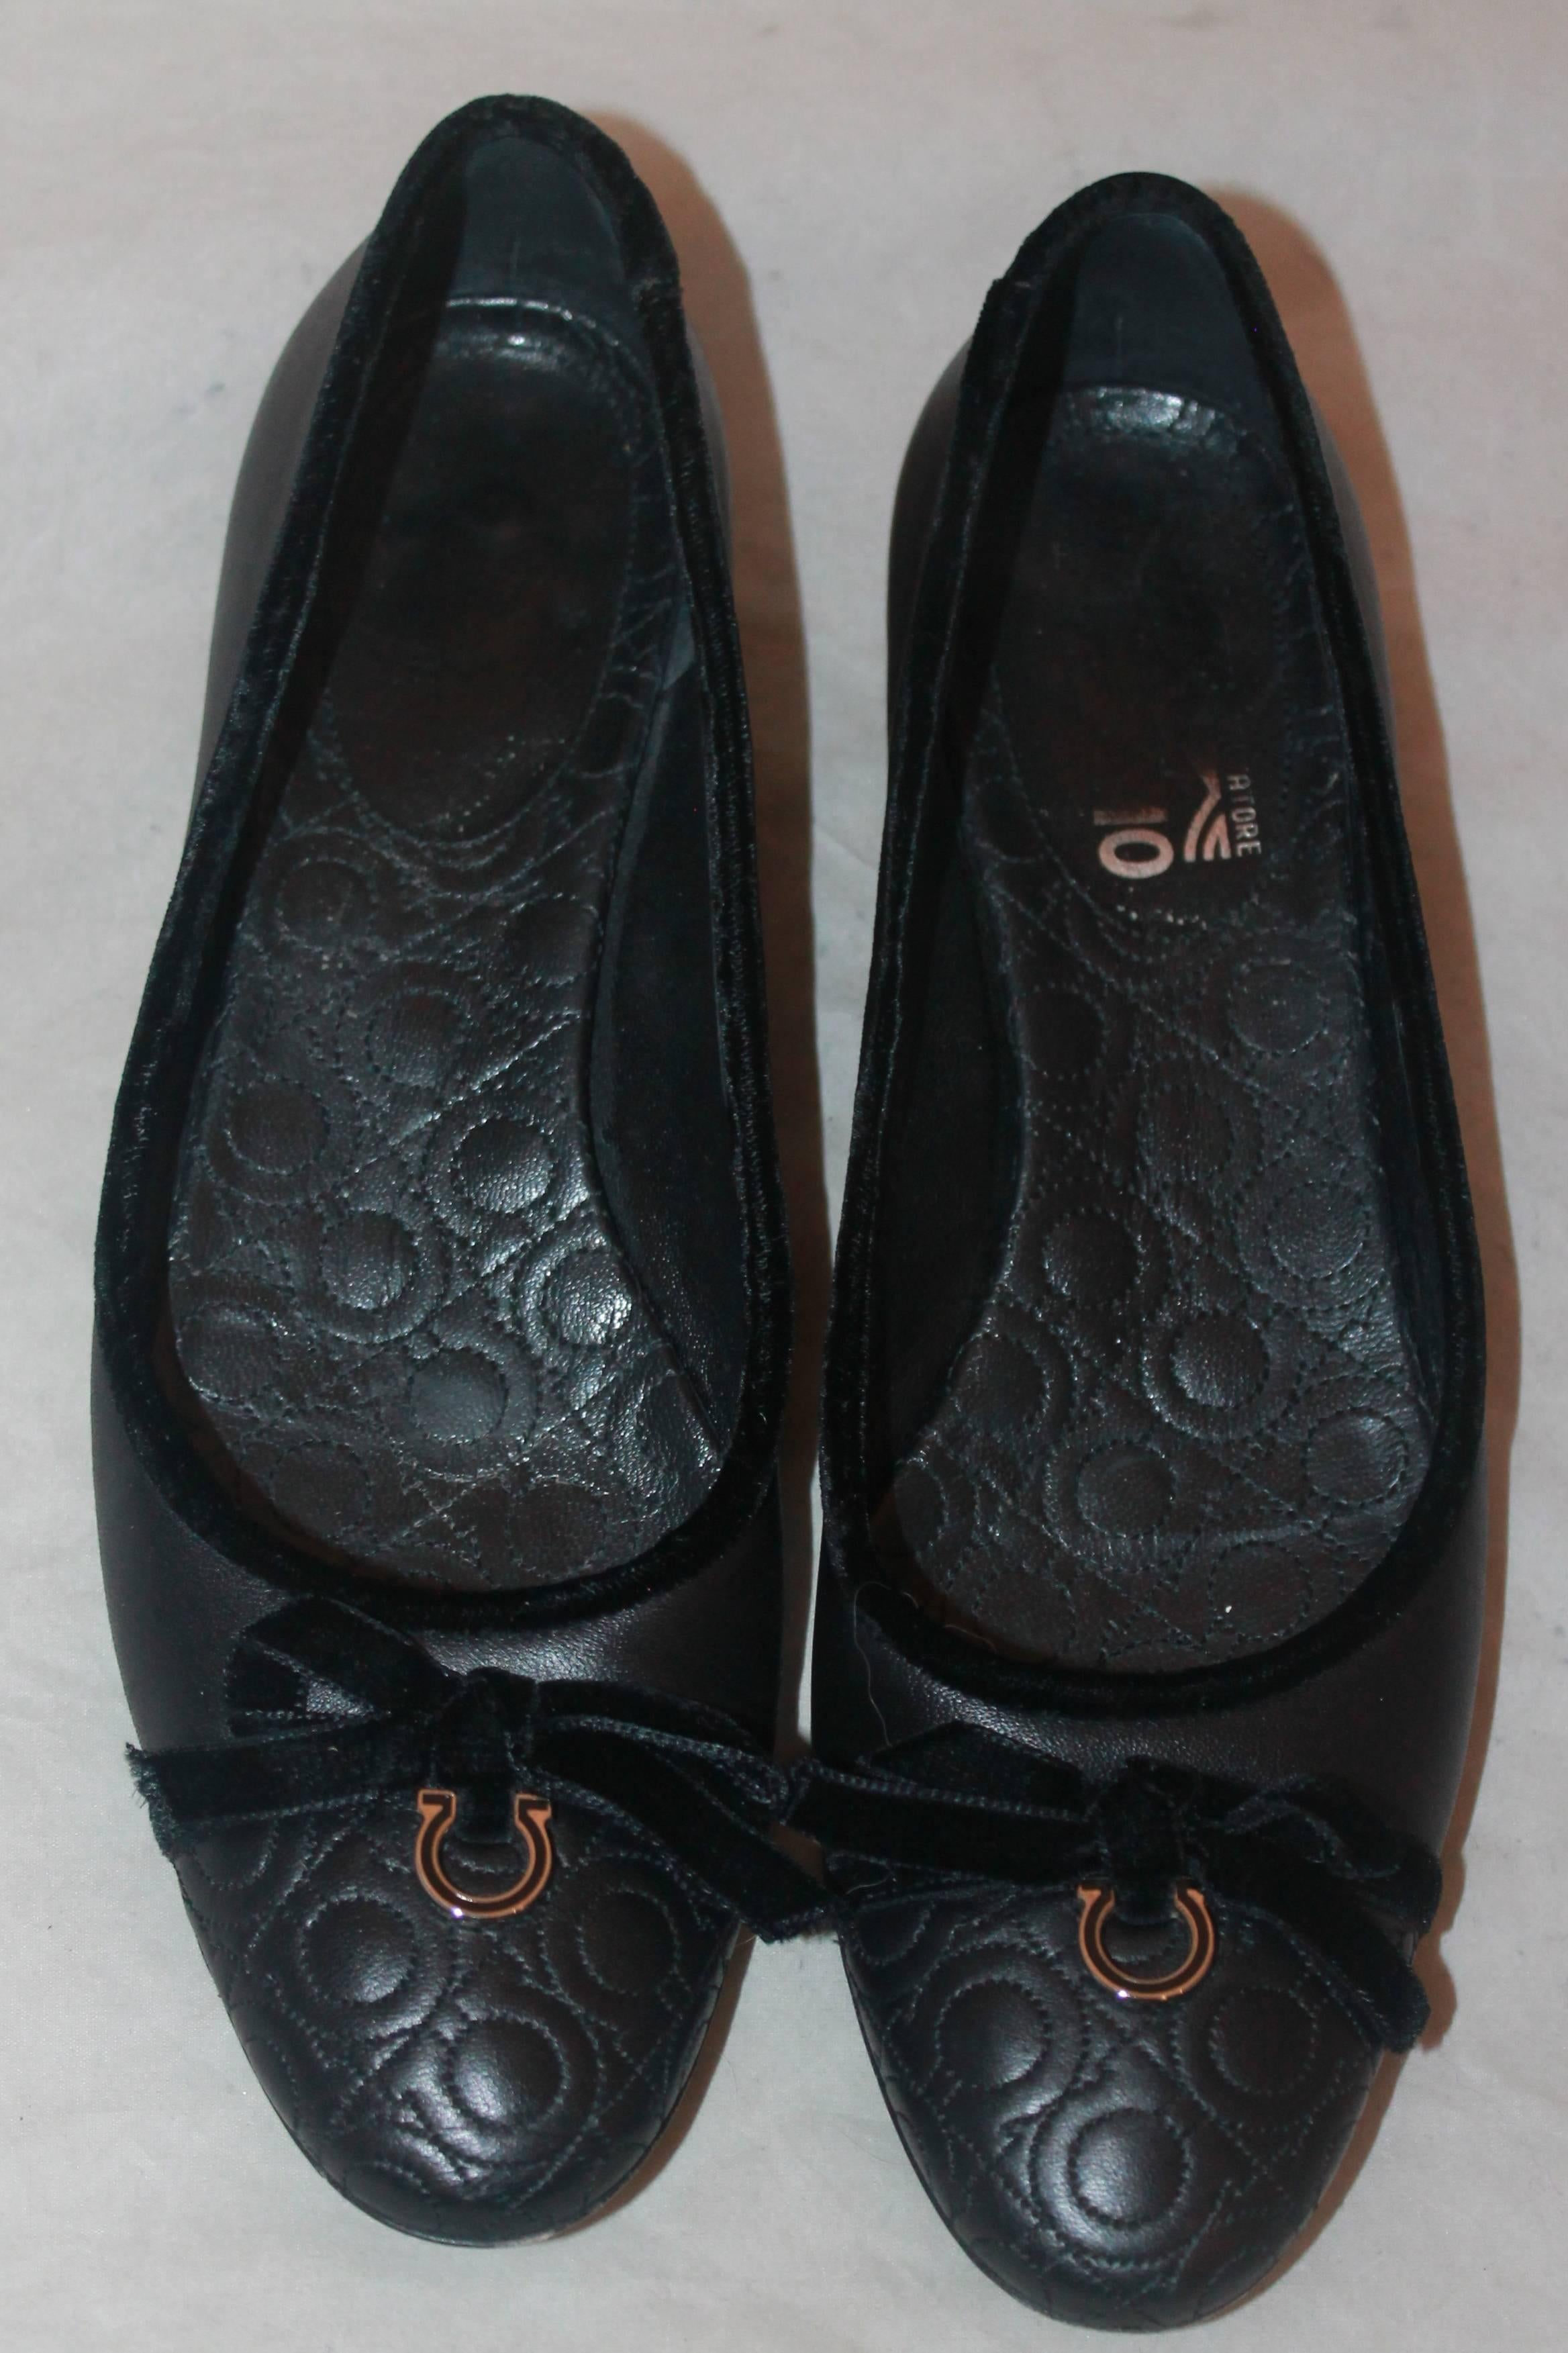 Ferragamo Black Leather Ballet Flats with Velvet Trim - 7AA In Excellent Condition For Sale In West Palm Beach, FL